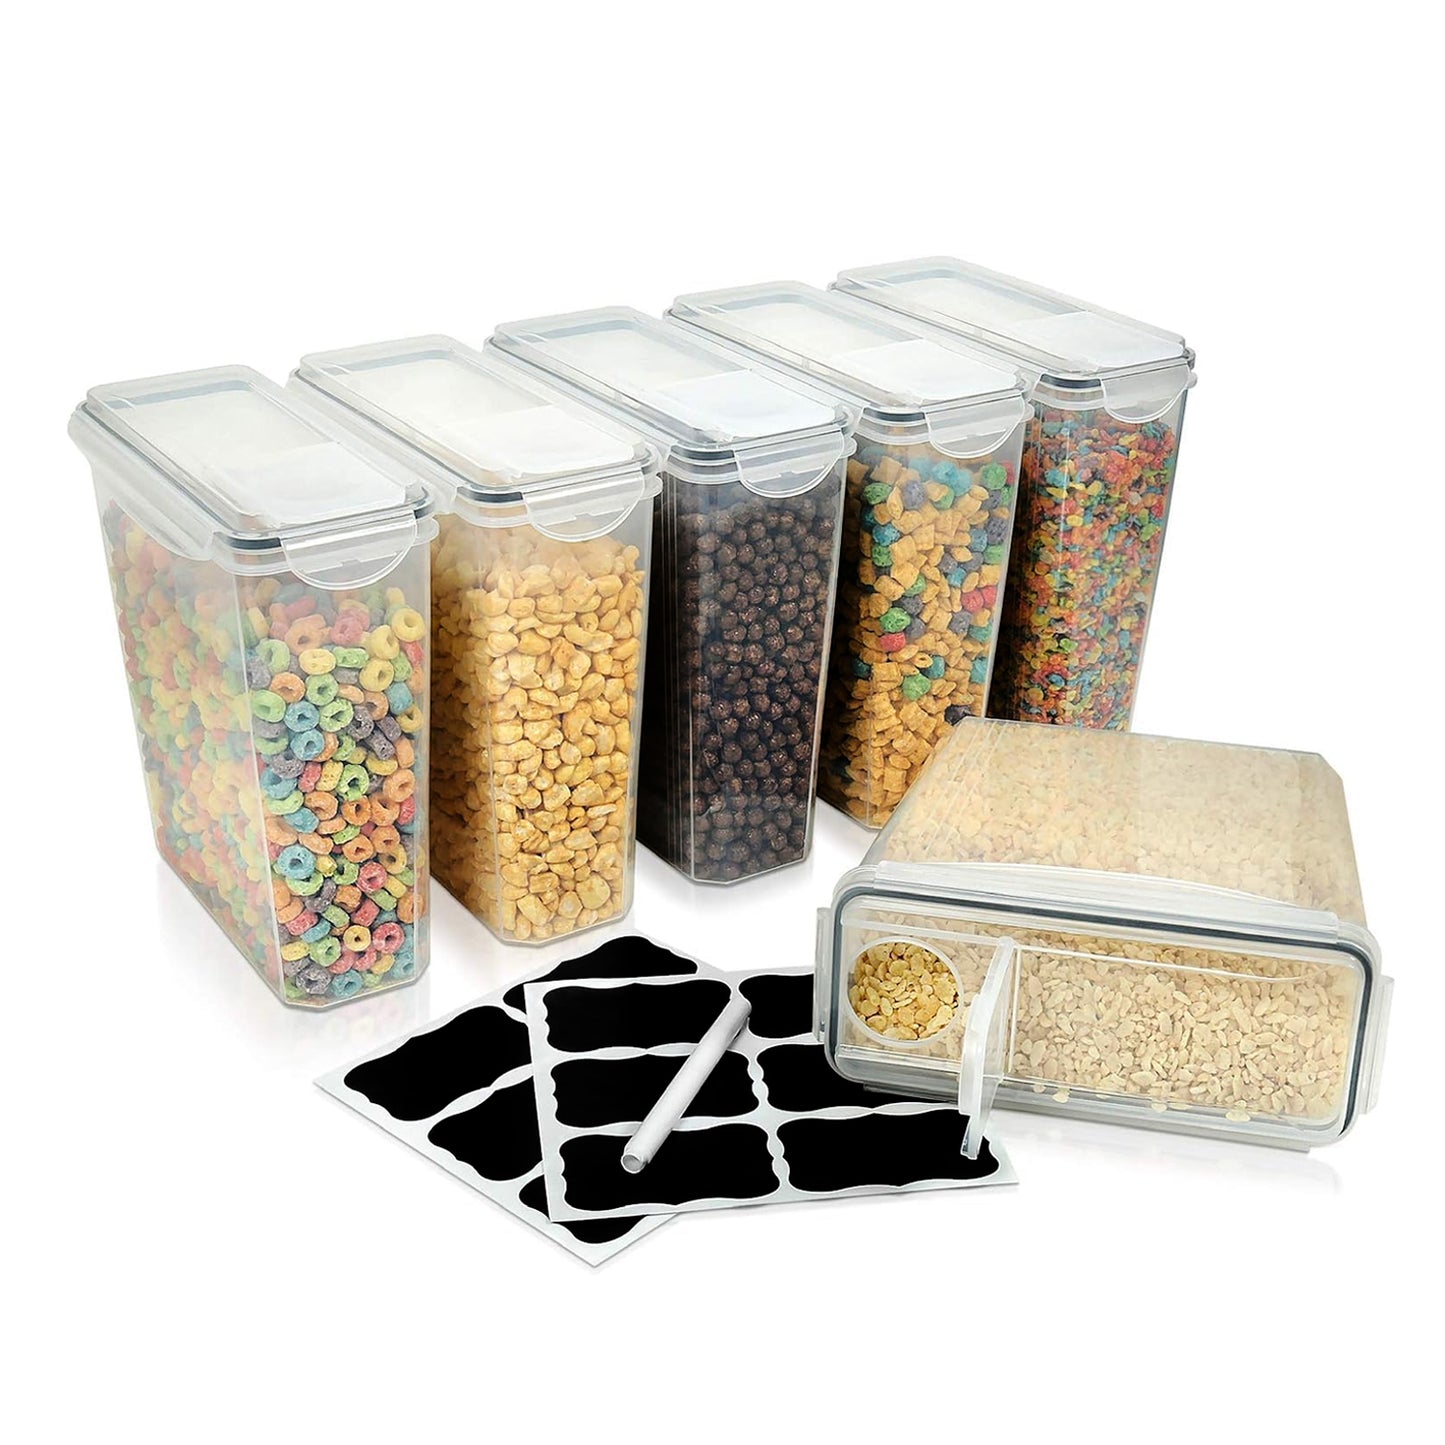 Multifunctional Airtight Cereal Dispenser Food Storage Container Pen and Sticker